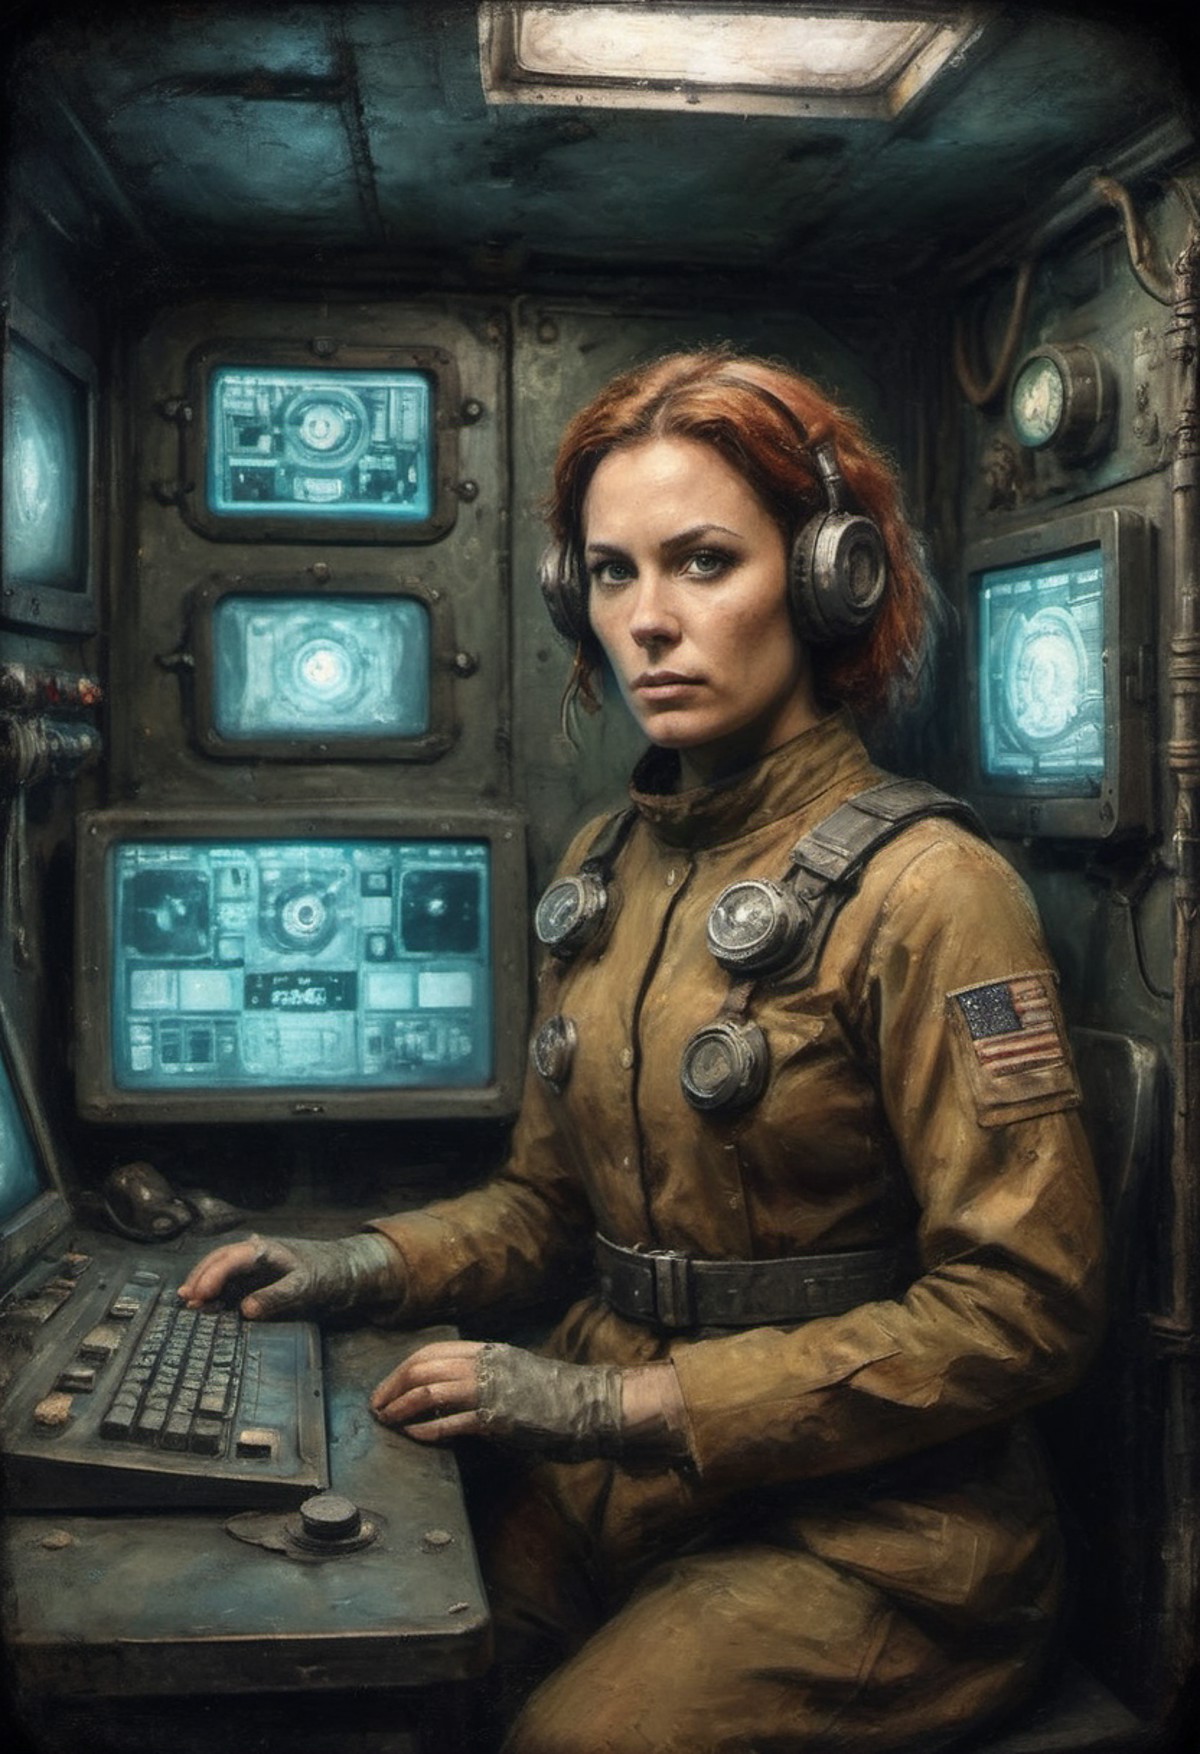 gritty colorized tintype portrait of a sci-fi hero named Commander Bria Ursan in an underground bunker glowing monitors an...